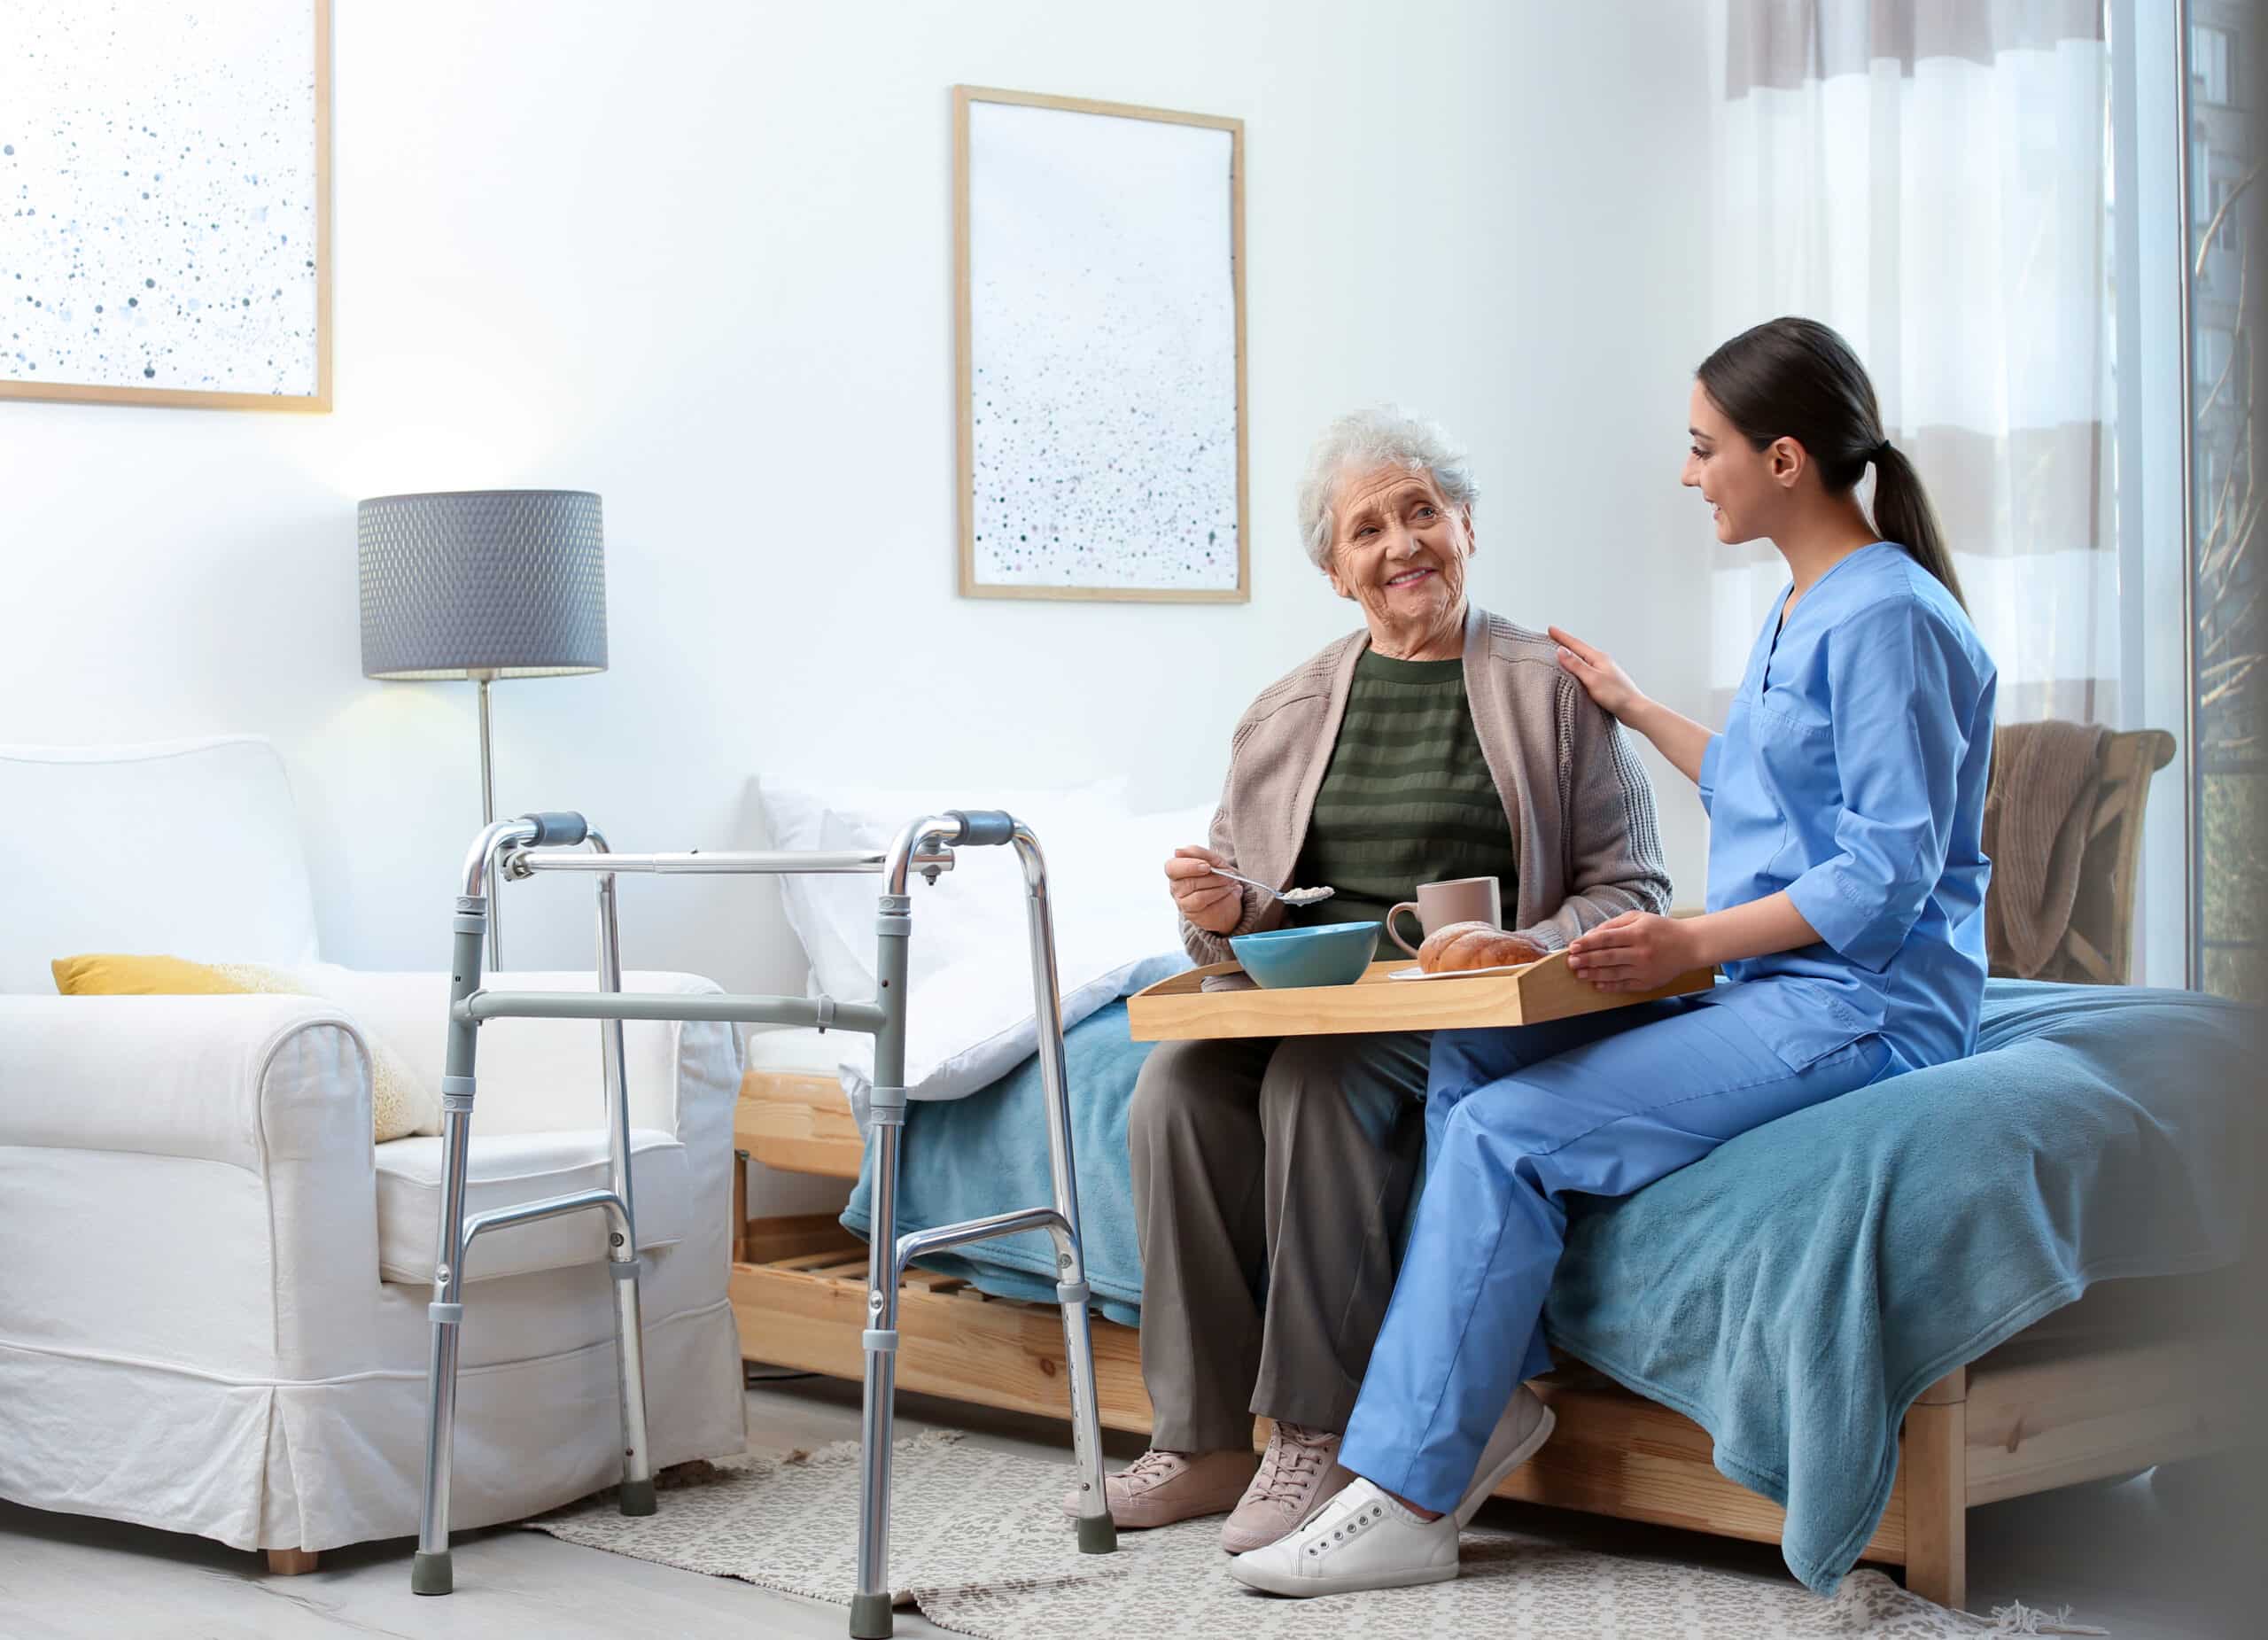 A nurse attentively sits beside an elderly woman on a bed, providing care and support.